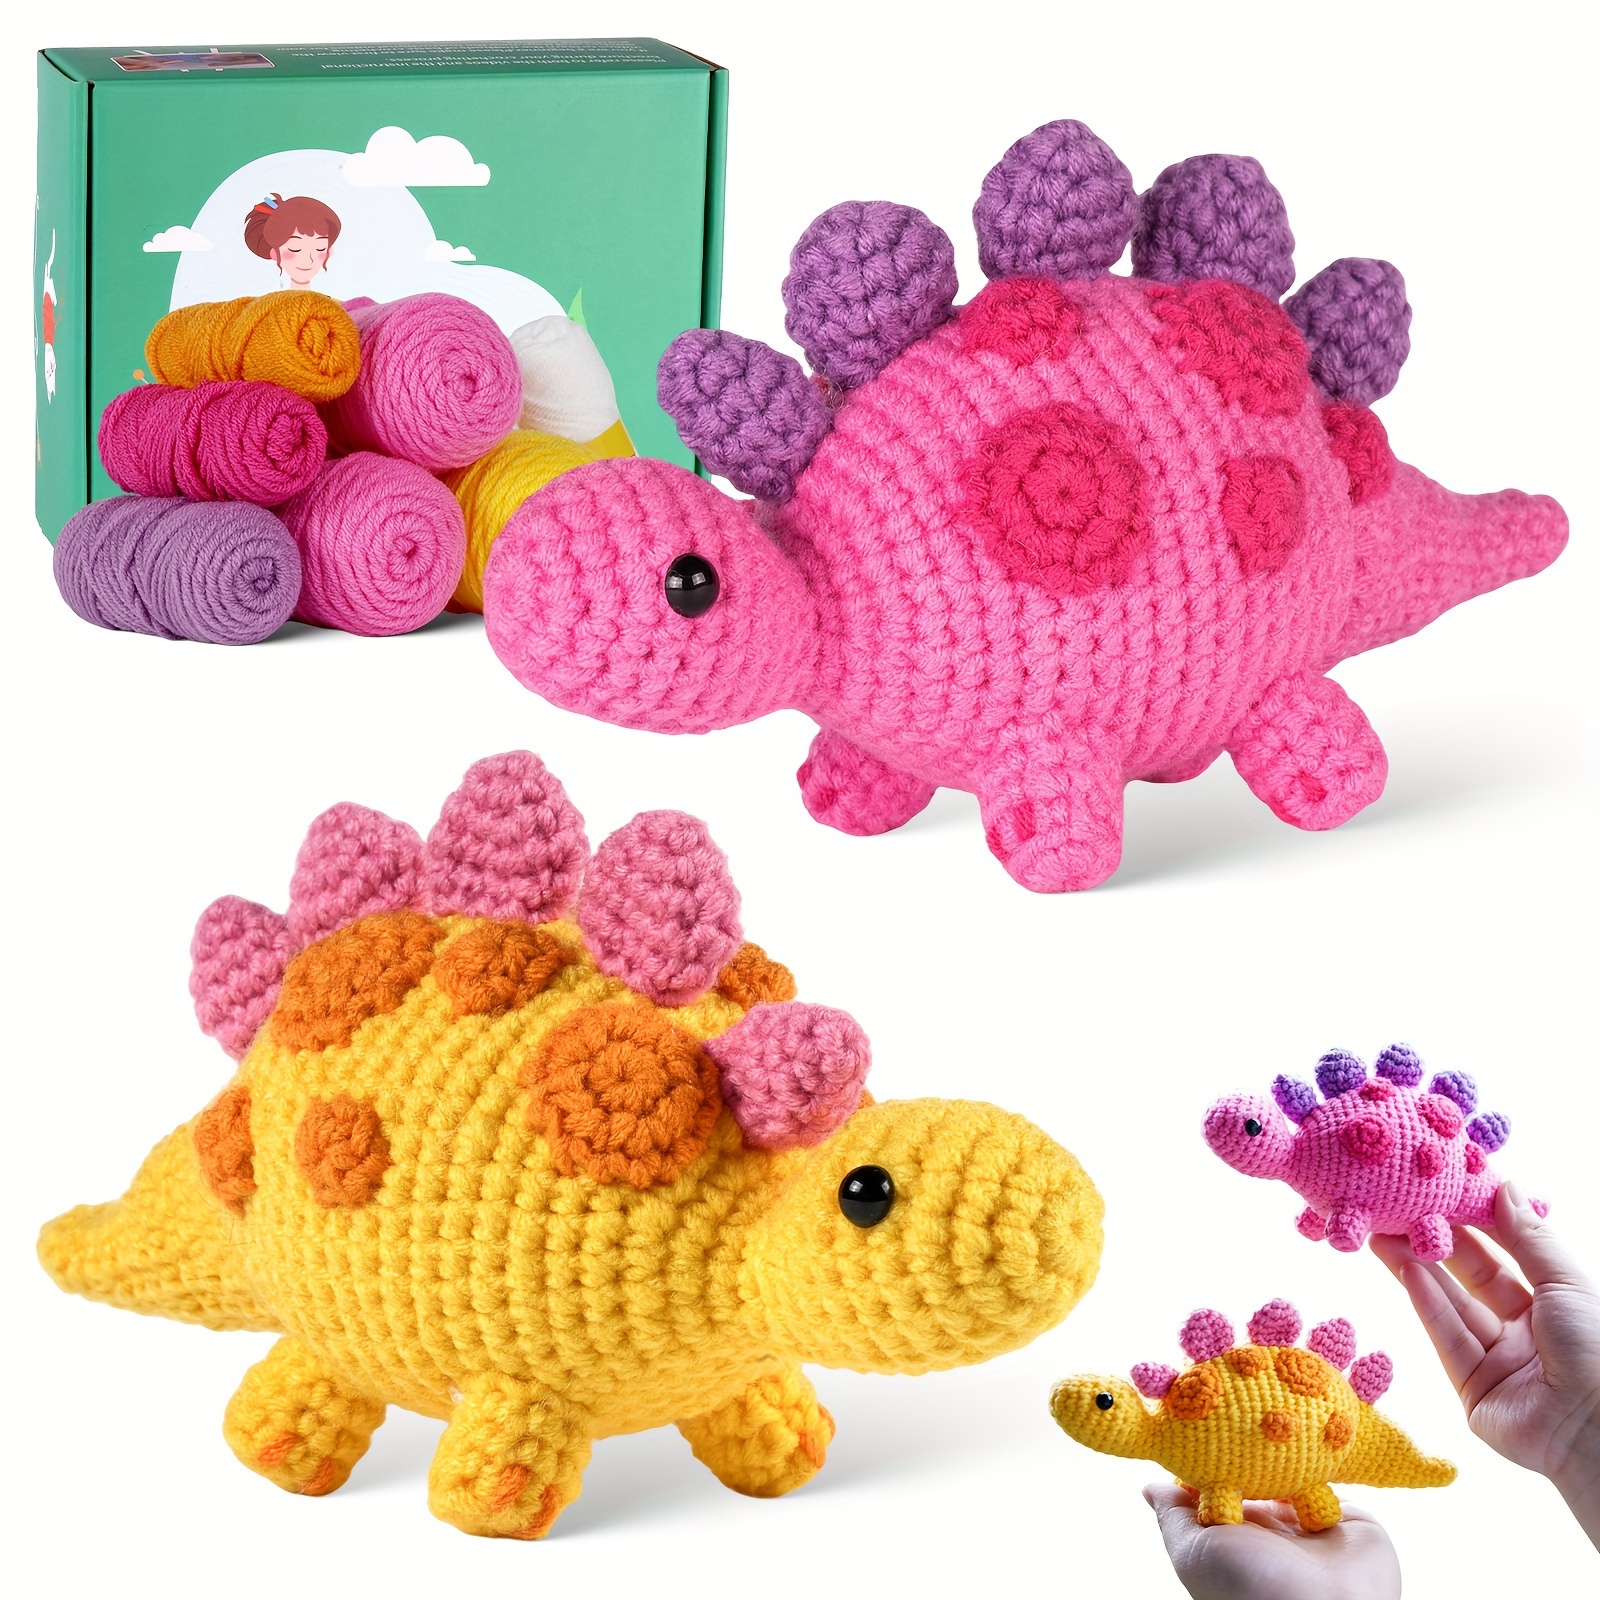 

Two-pack Cute Stegosaurus Beginner Crochet Kit: Includes Step-by-step English Video Tutorials, Basic Manual, And Diy Handicrafts Starter Kit For Beginners - Suitable For All Seasons